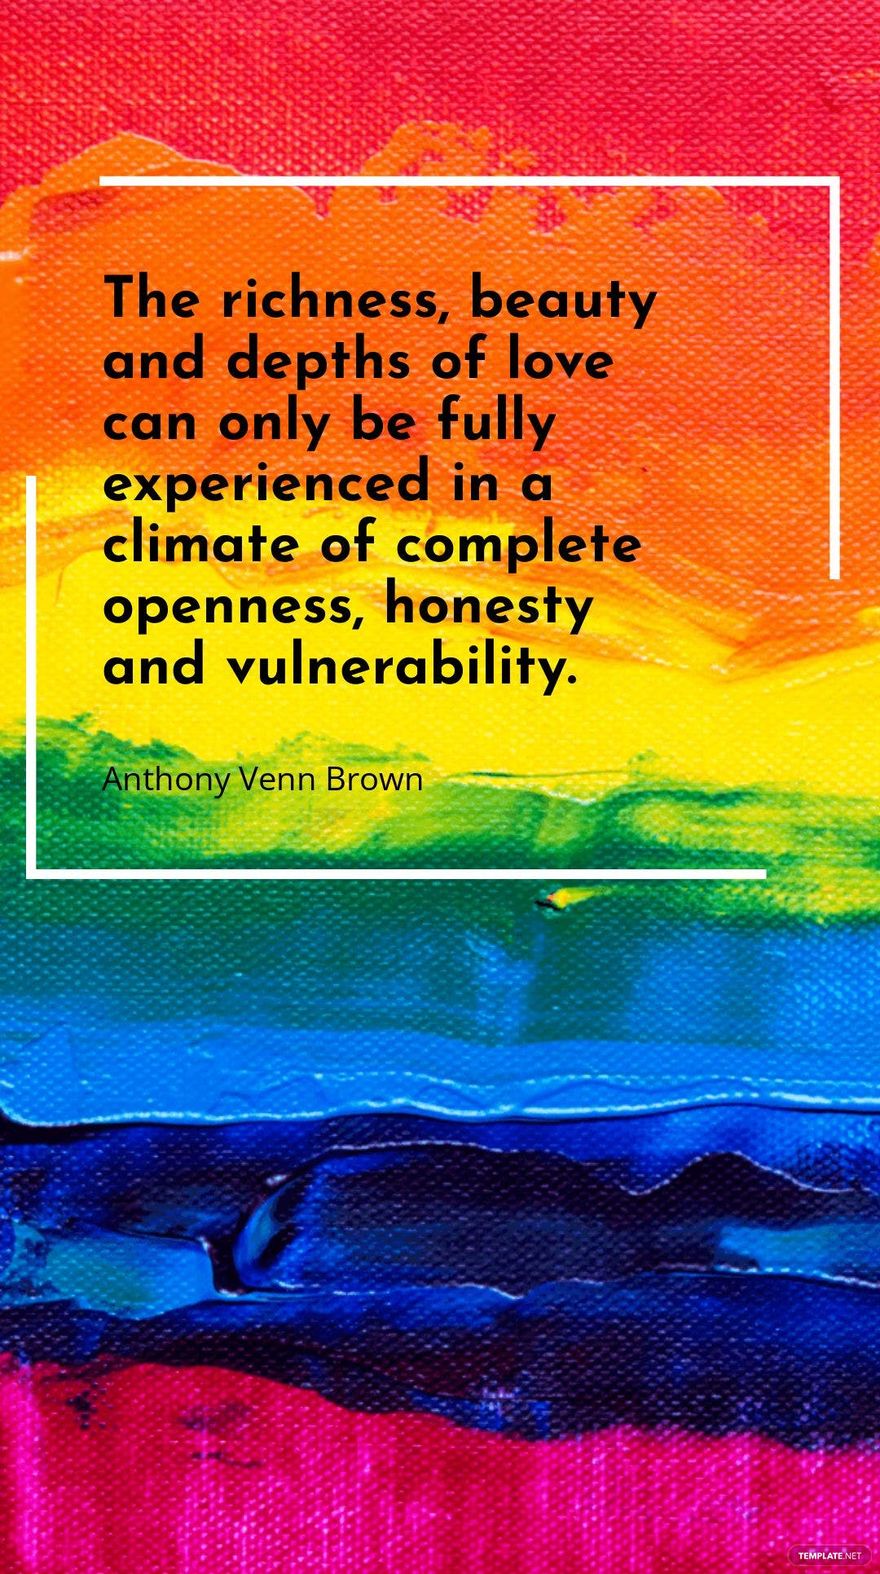 Free Anthony Venn Brown - The richness, beauty and depths of love can only be fully experienced in a climate of complete openness, honesty and vulnerability. in JPG